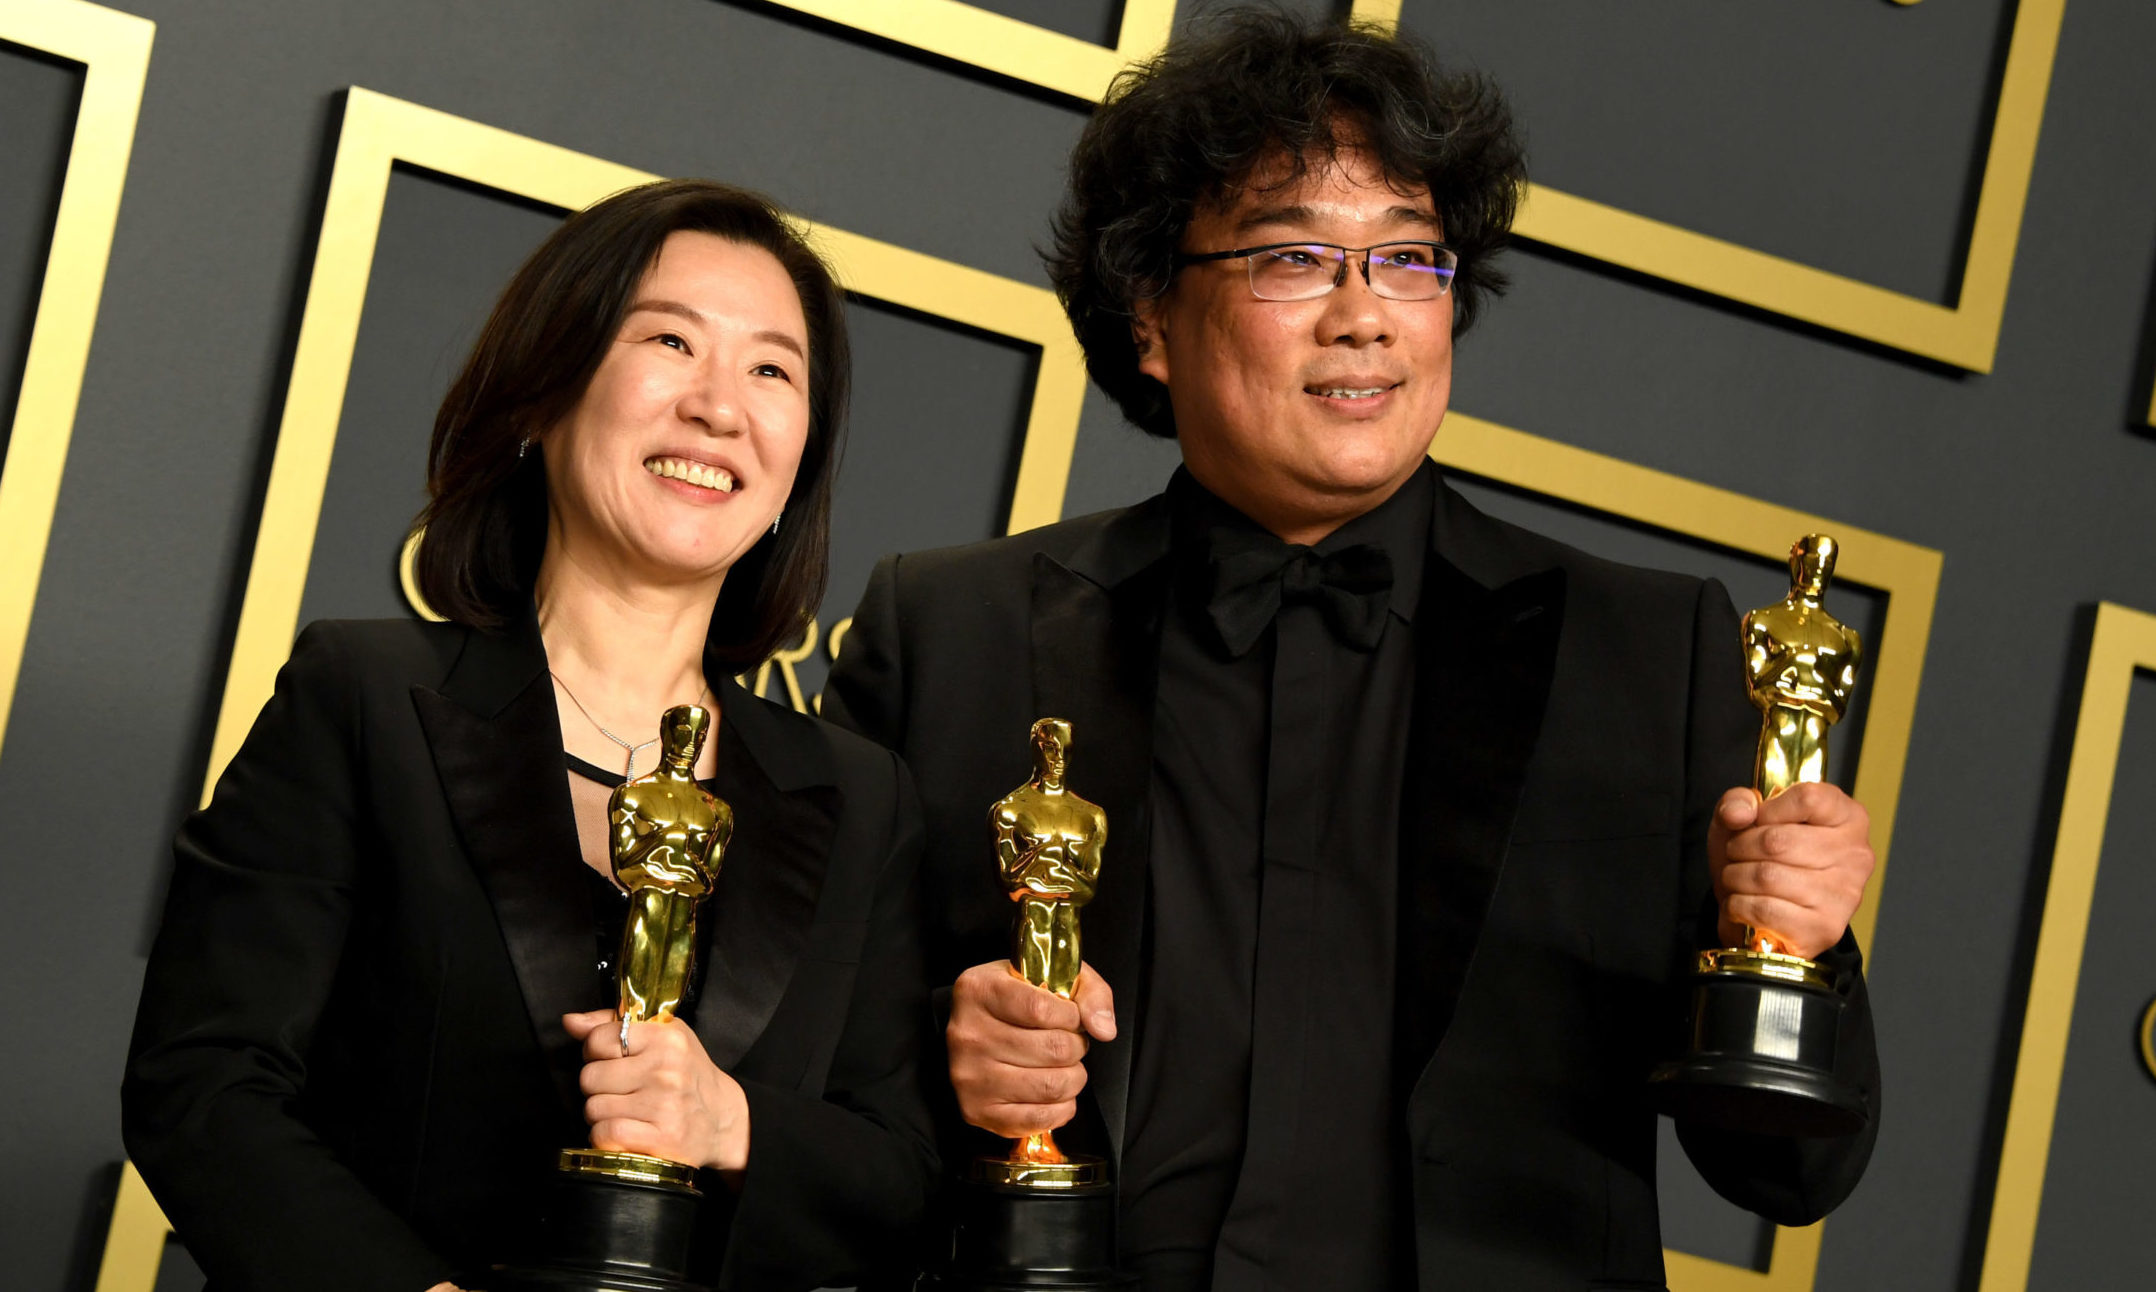 Bong Joon-ho (right) and Kwak Sin-ae with their Oscars for Best Original Screenplay, International Feature Film, Best Director, and Best Picture for Parasite in the press room at the 92nd Academy Awards held at the Dolby Theatre in Hollywood, Los Angeles.